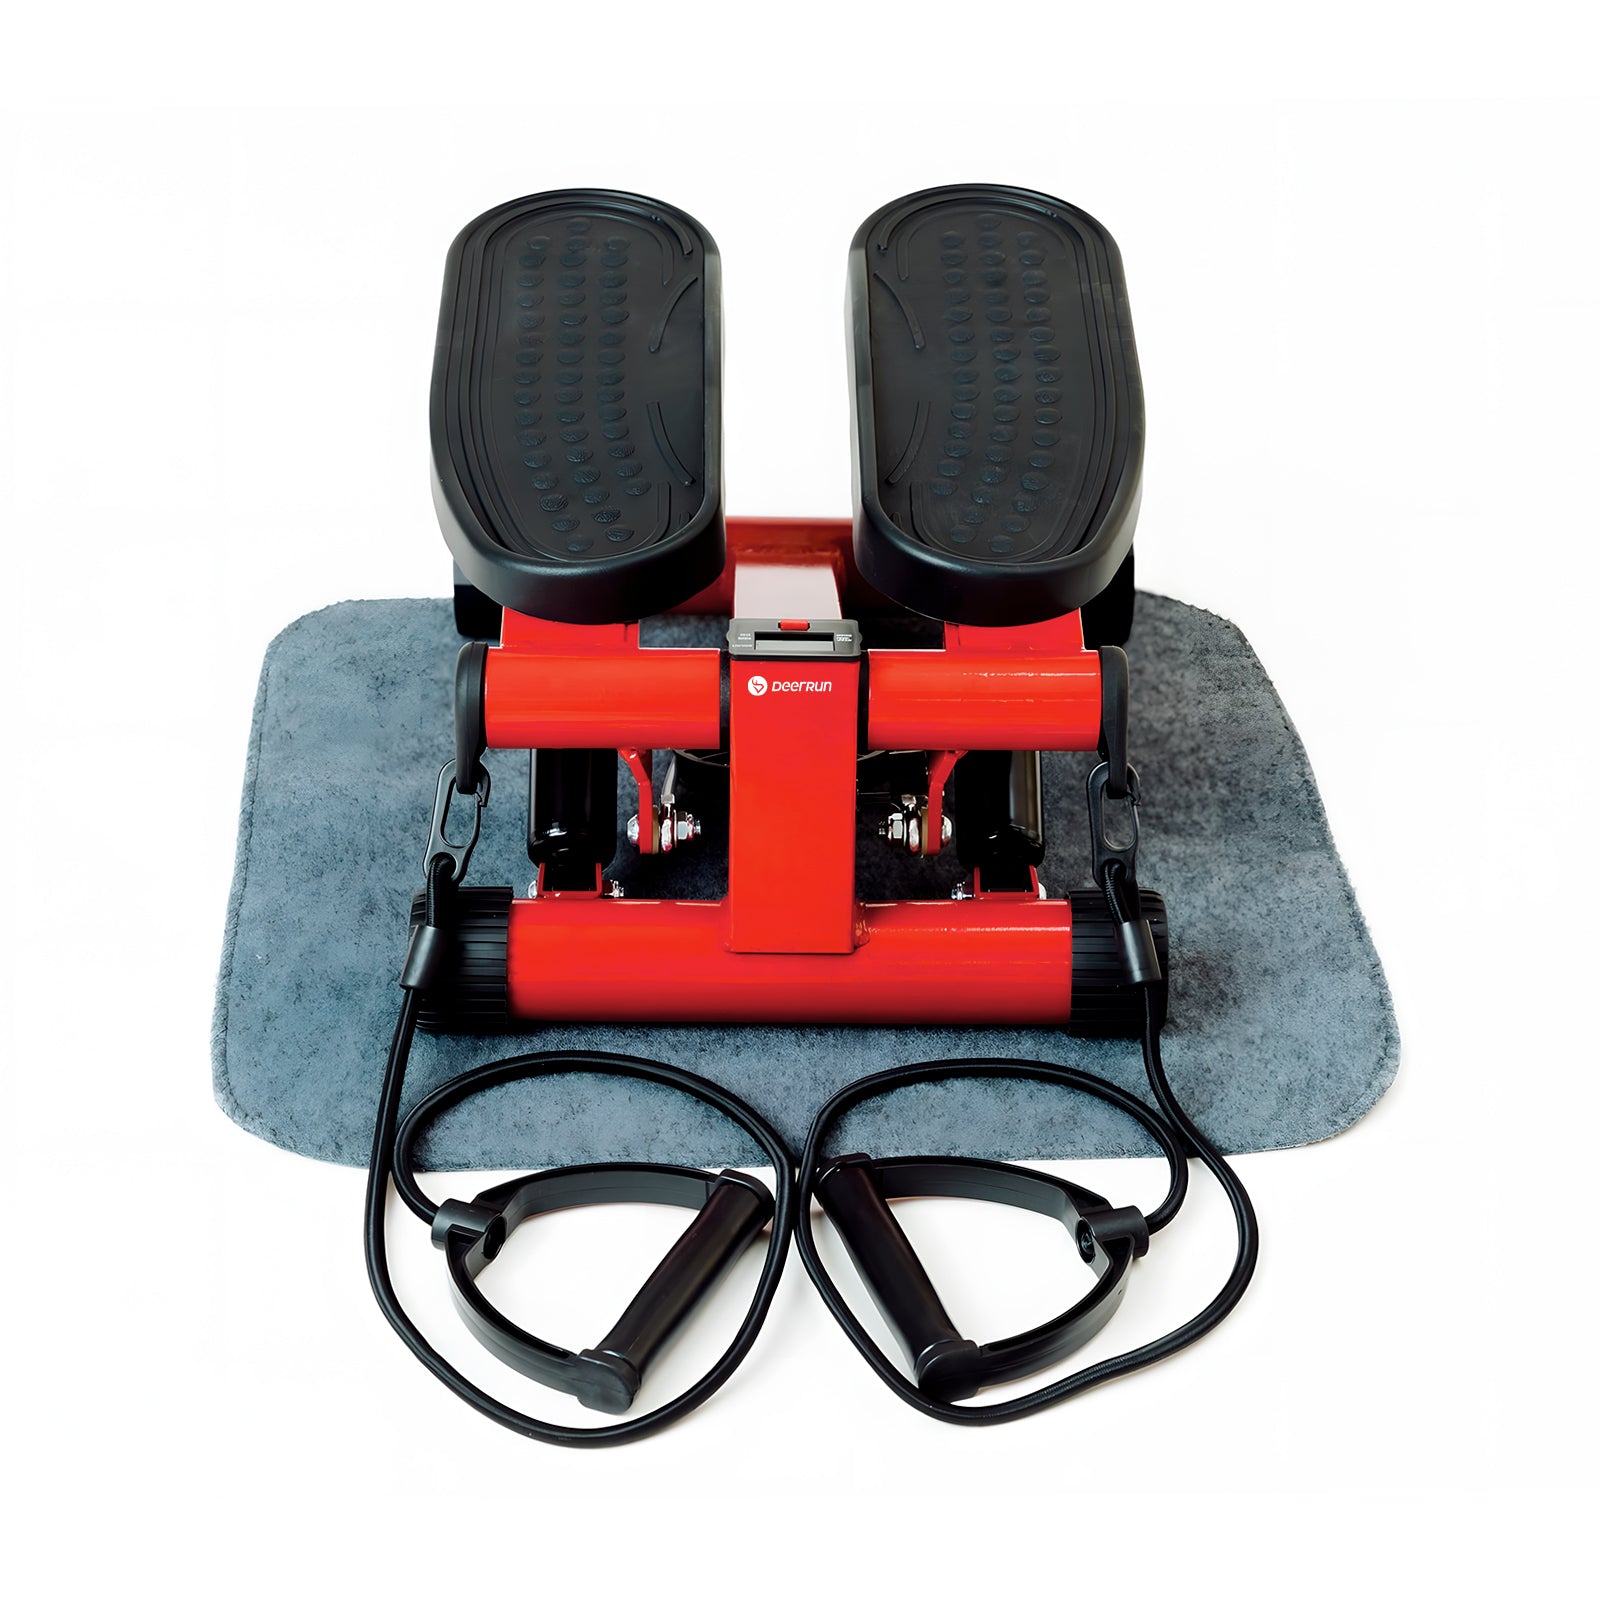 DeerRun®  Steppers for Exercise - Hydraulic Fitness Stepper with LCD Monitor